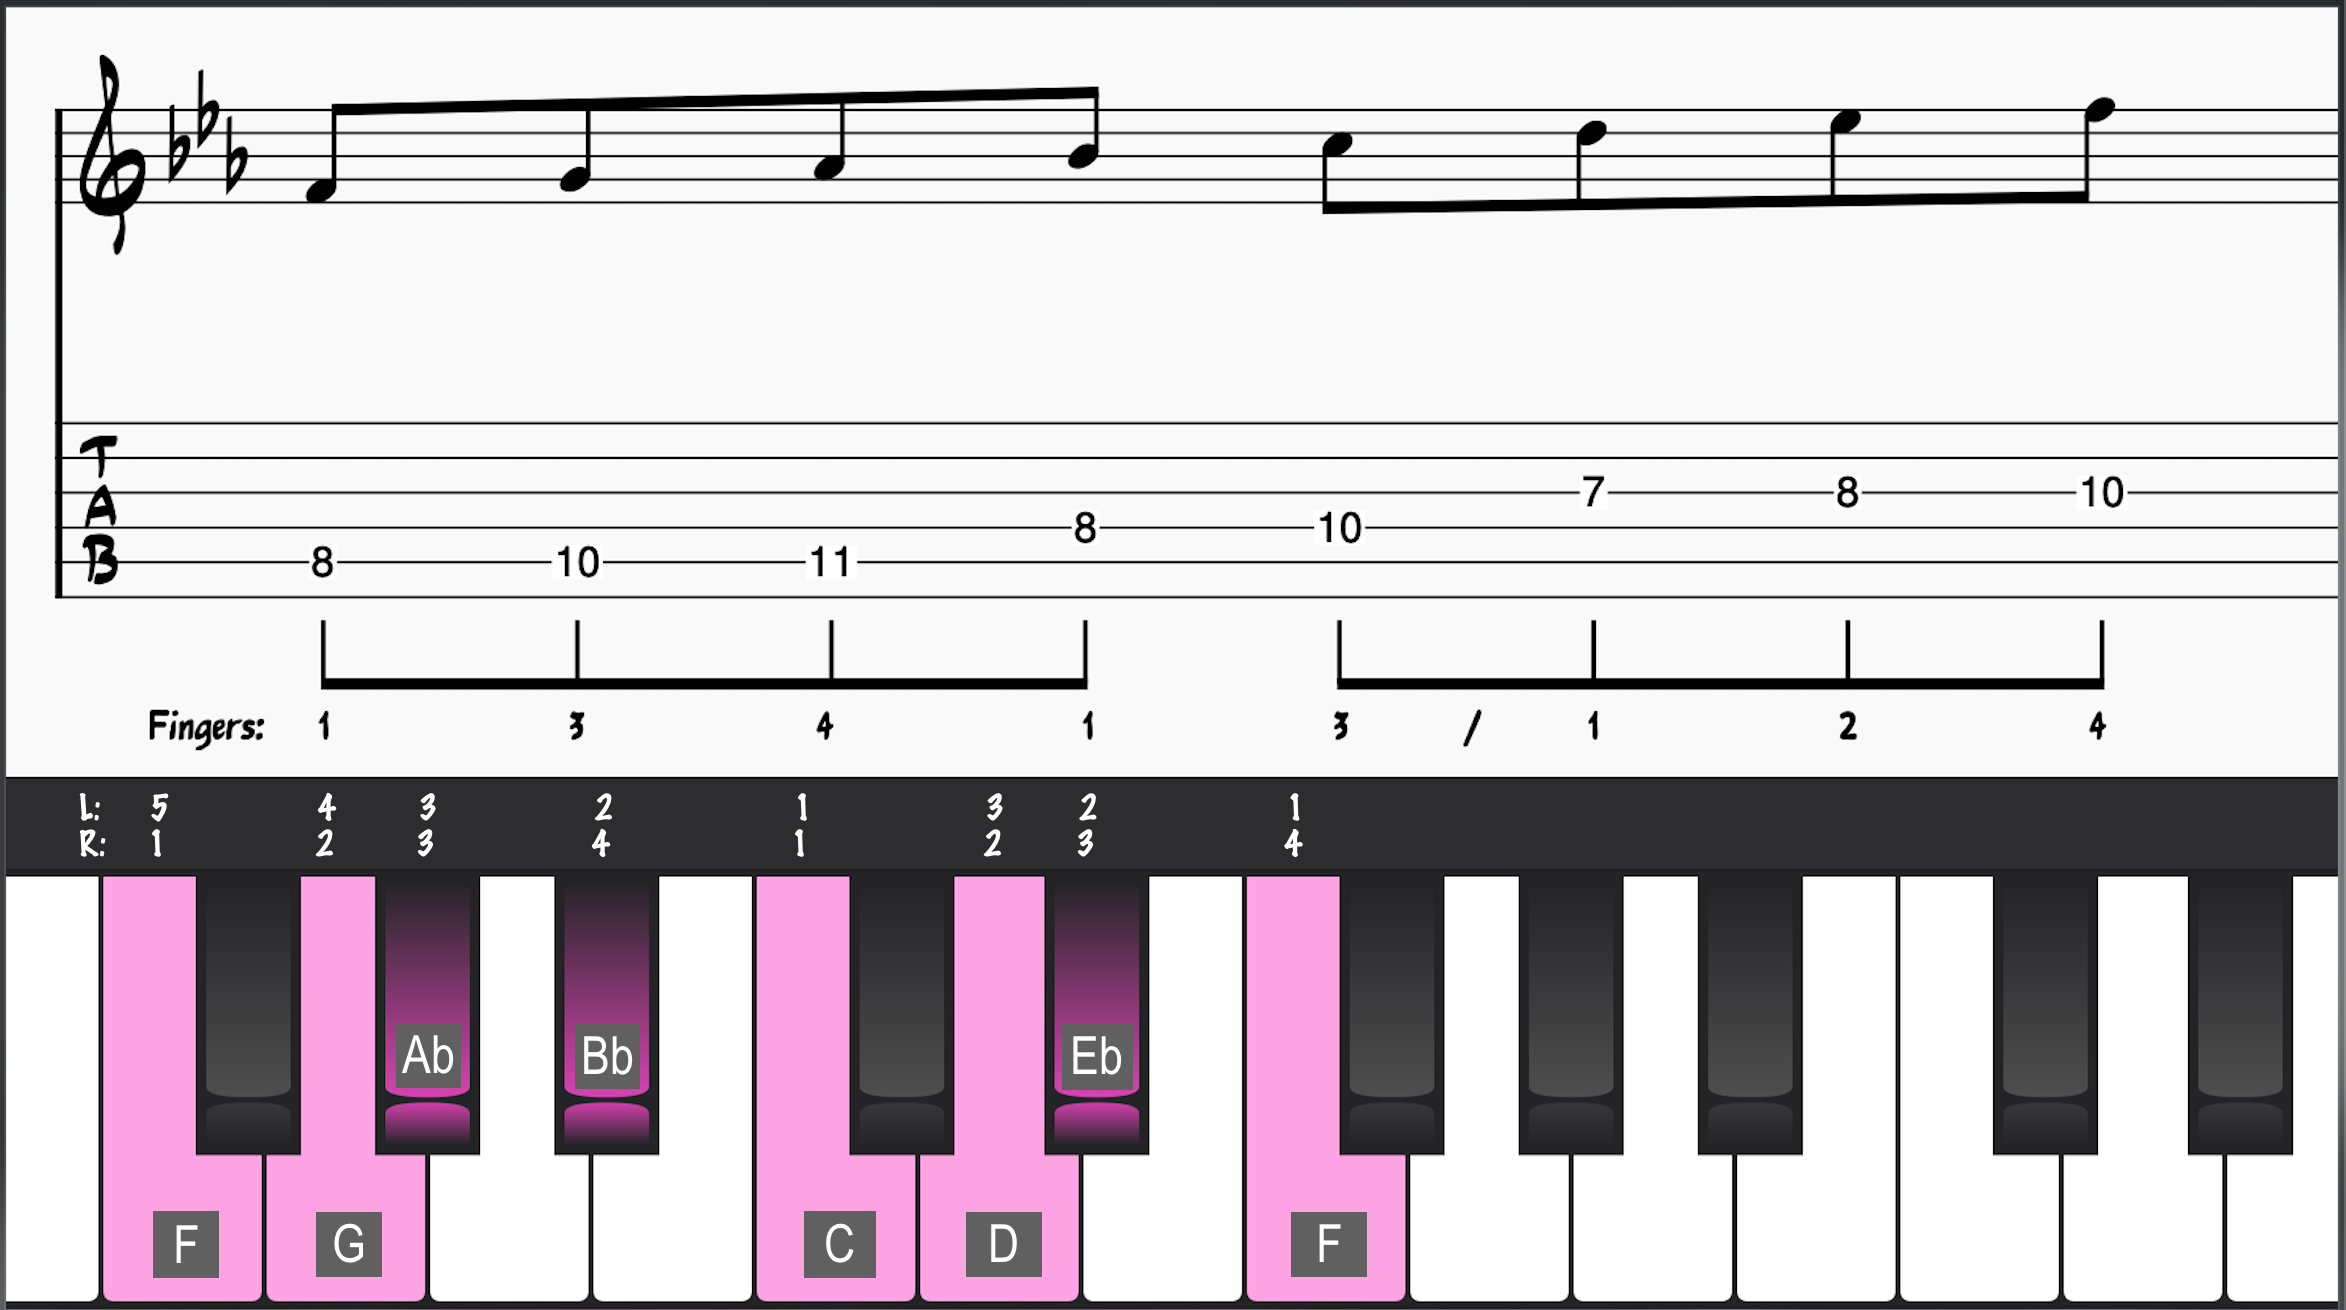 F Dorian Mode with Guitar and Piano Fingerings